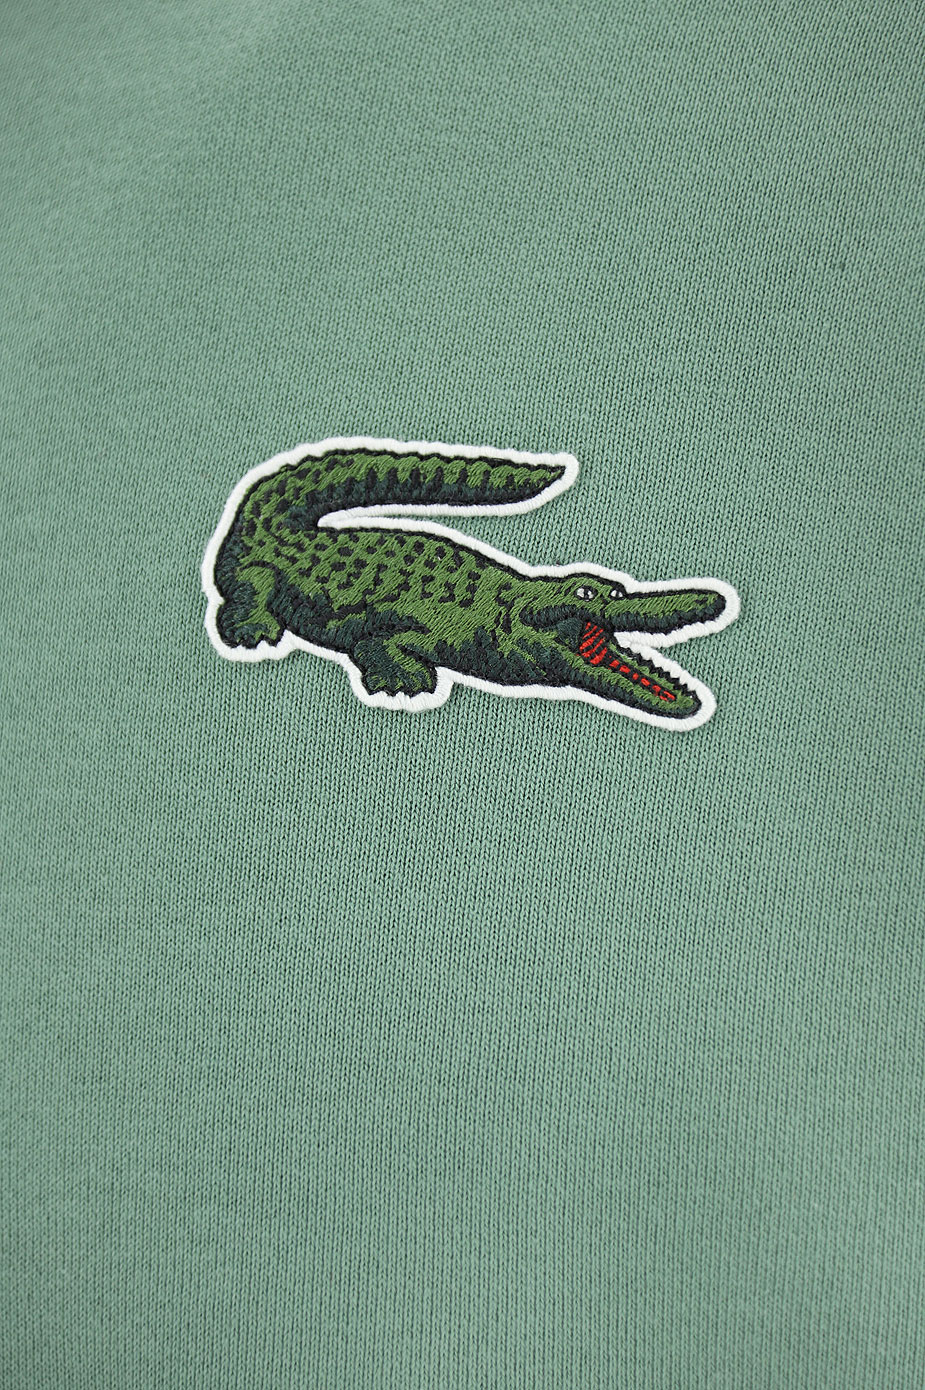 Mens Clothing Lacoste, Style code: sh6405-kx5-